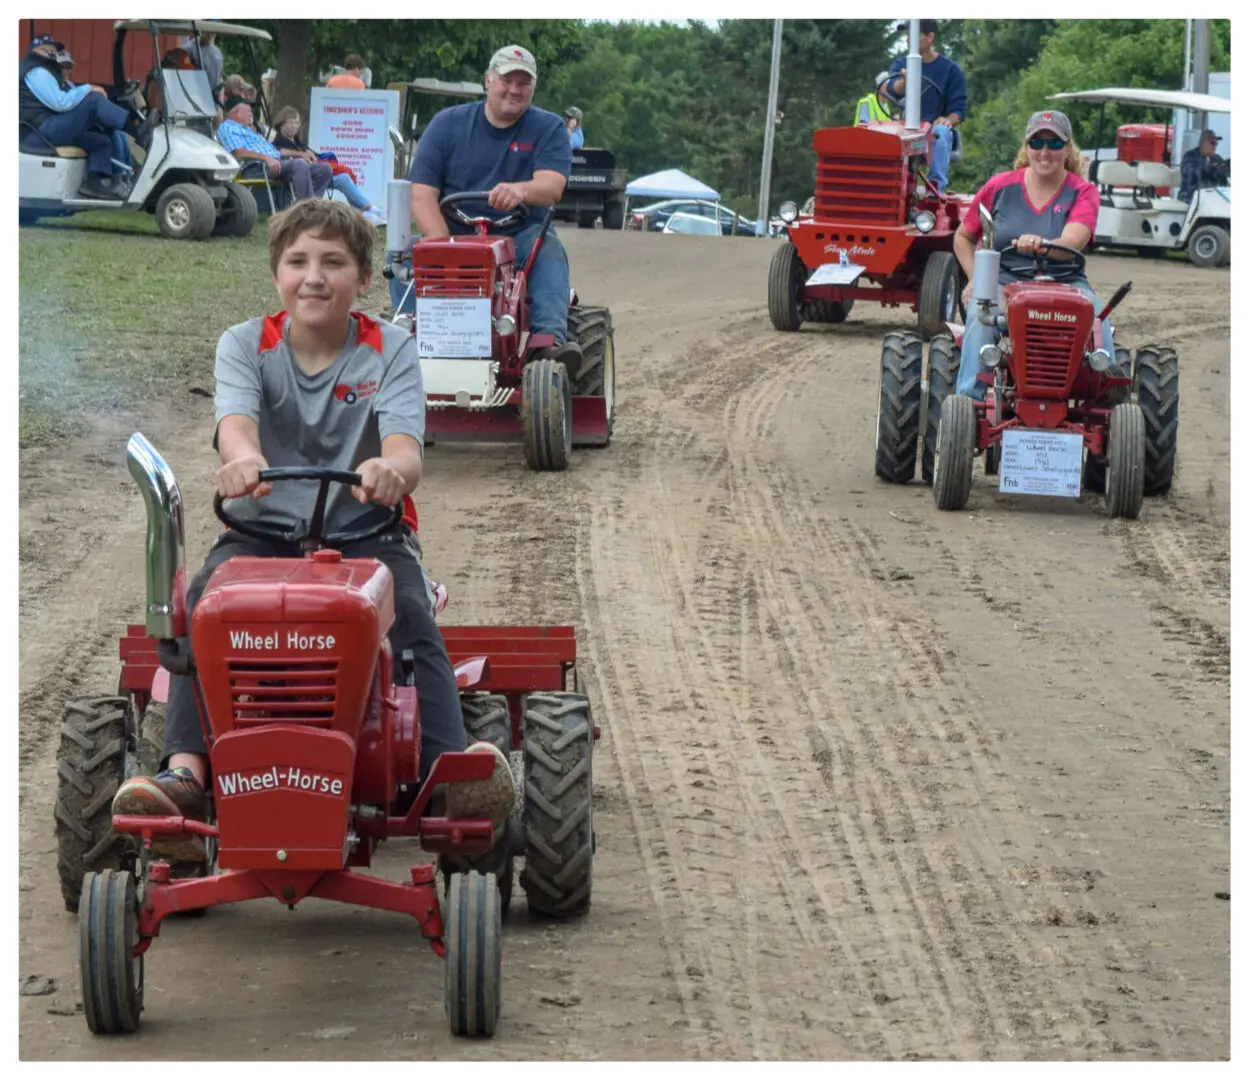 A group of people riding red tractors down a dirt road near their home.